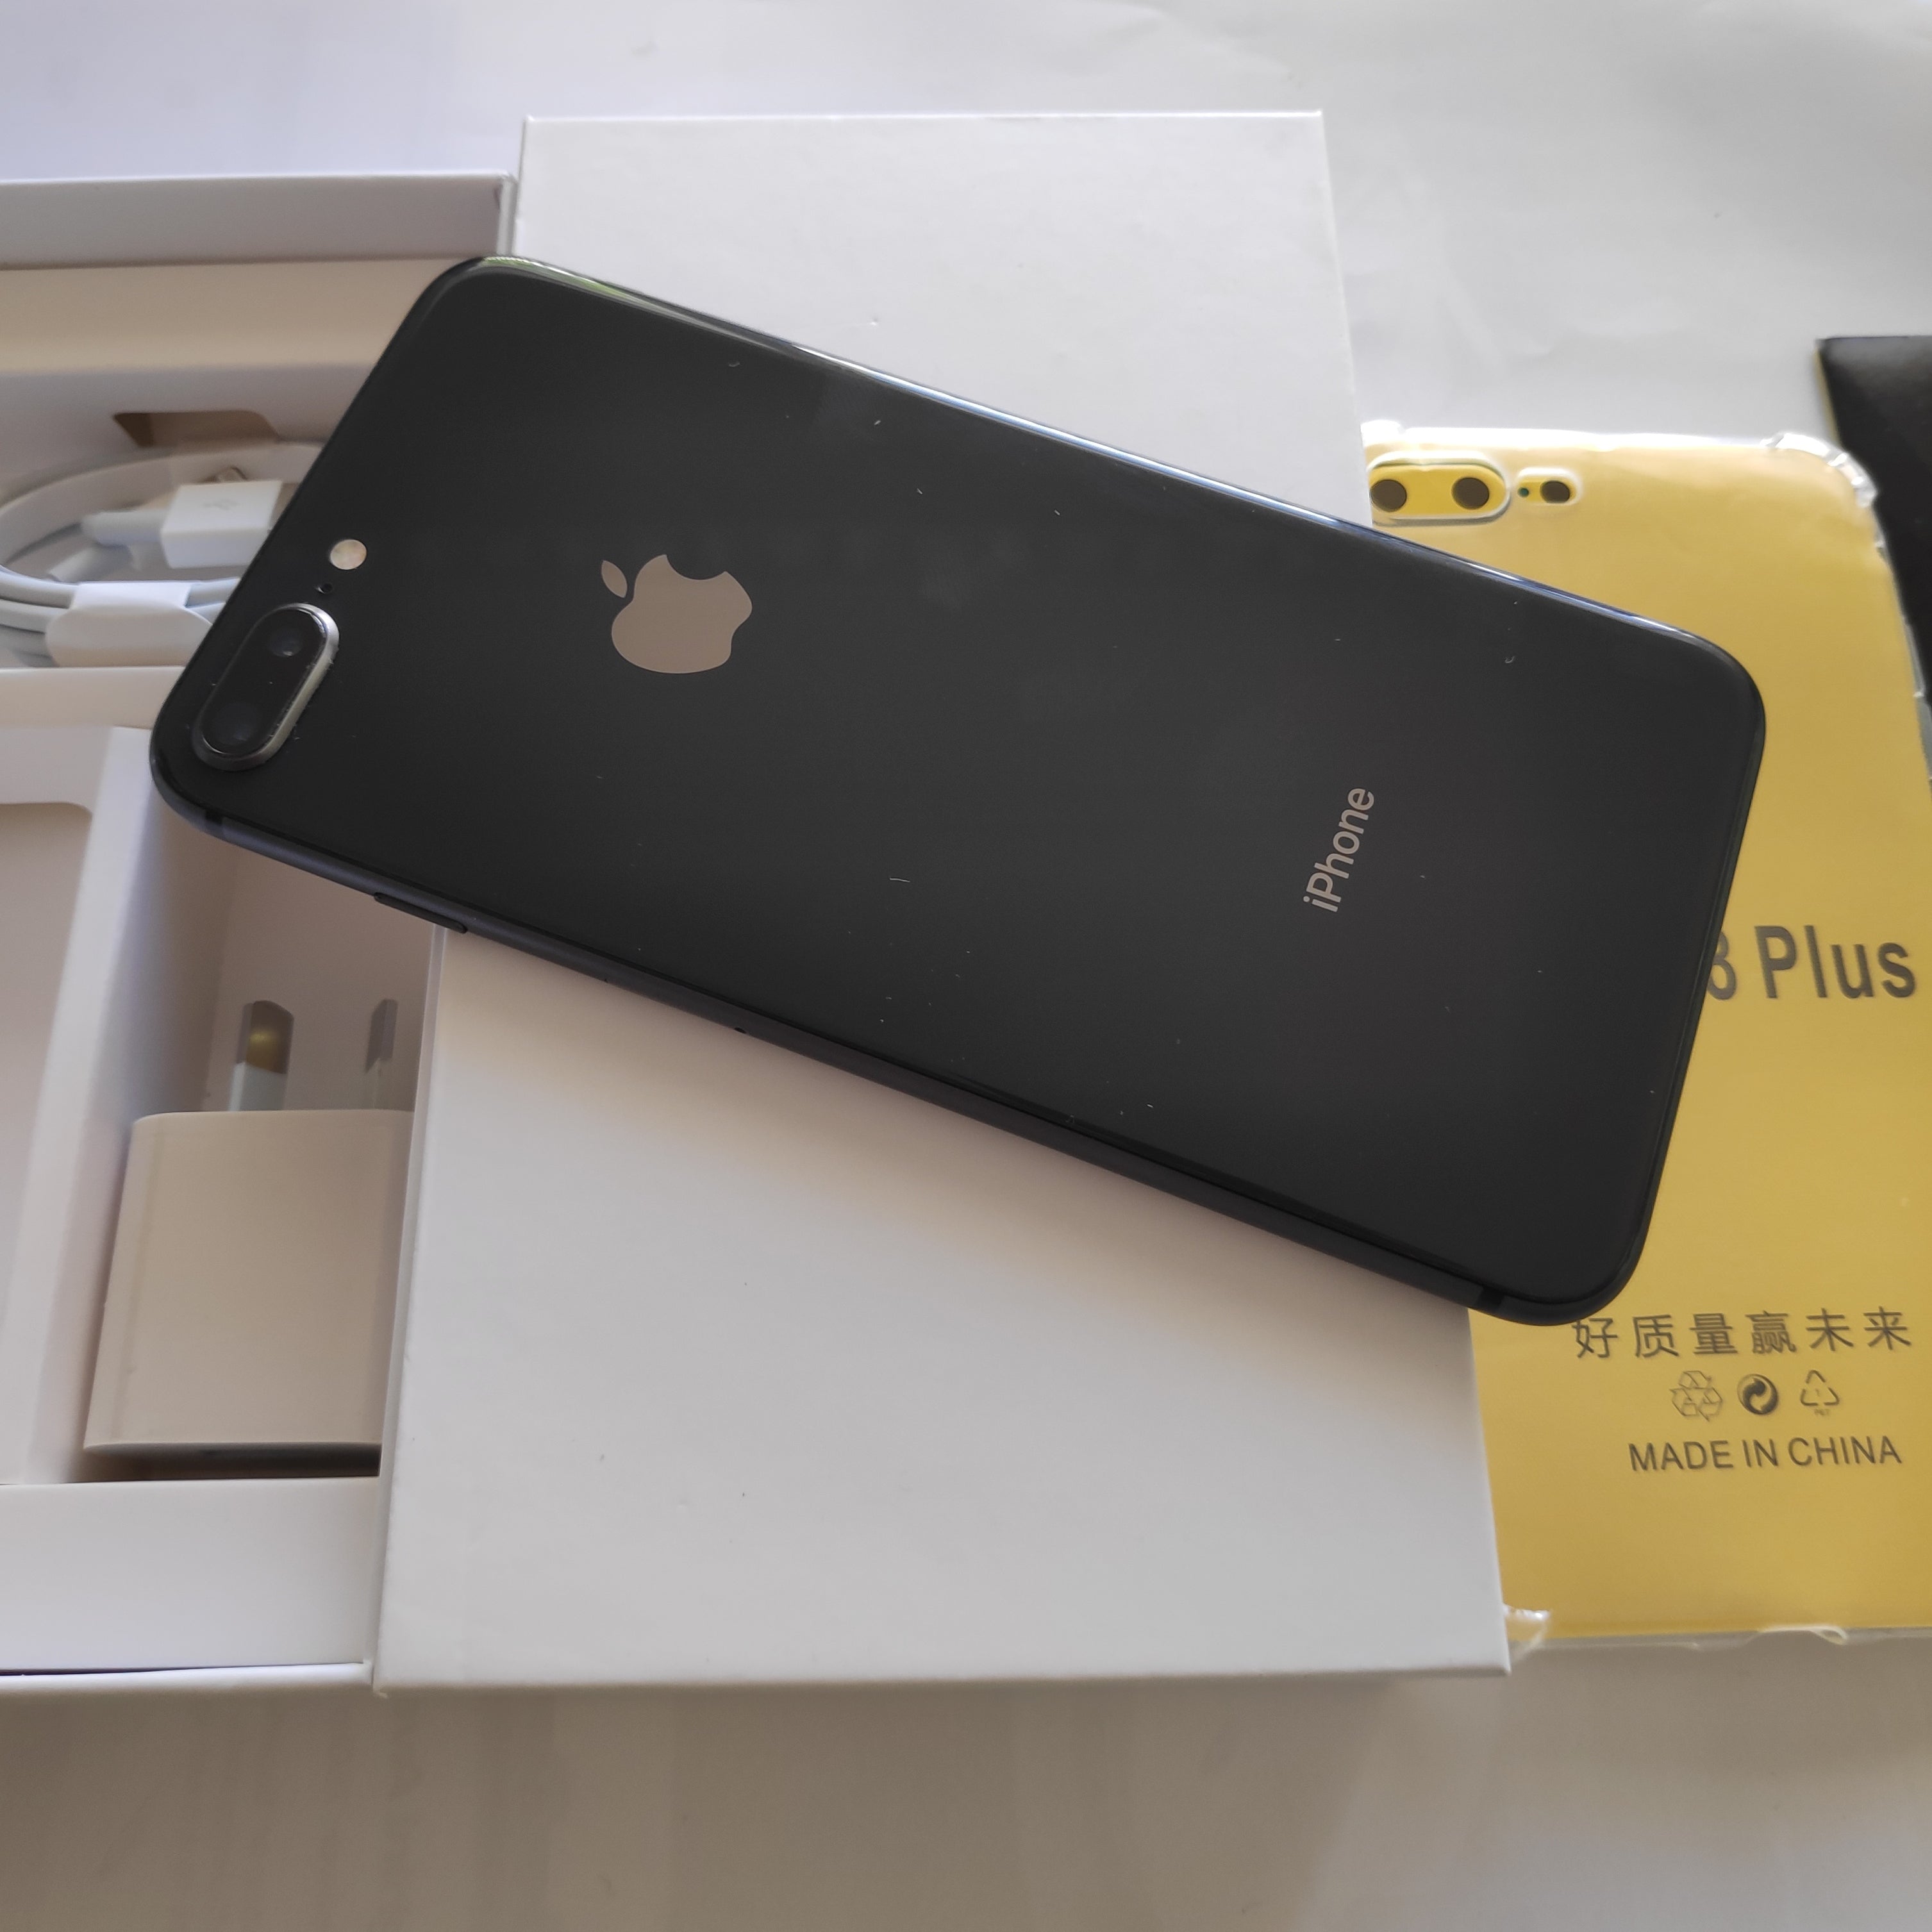 Apple iPhone 8 Plus 64GB Space Grey (As New) With Case, Screen Protector & Shipping